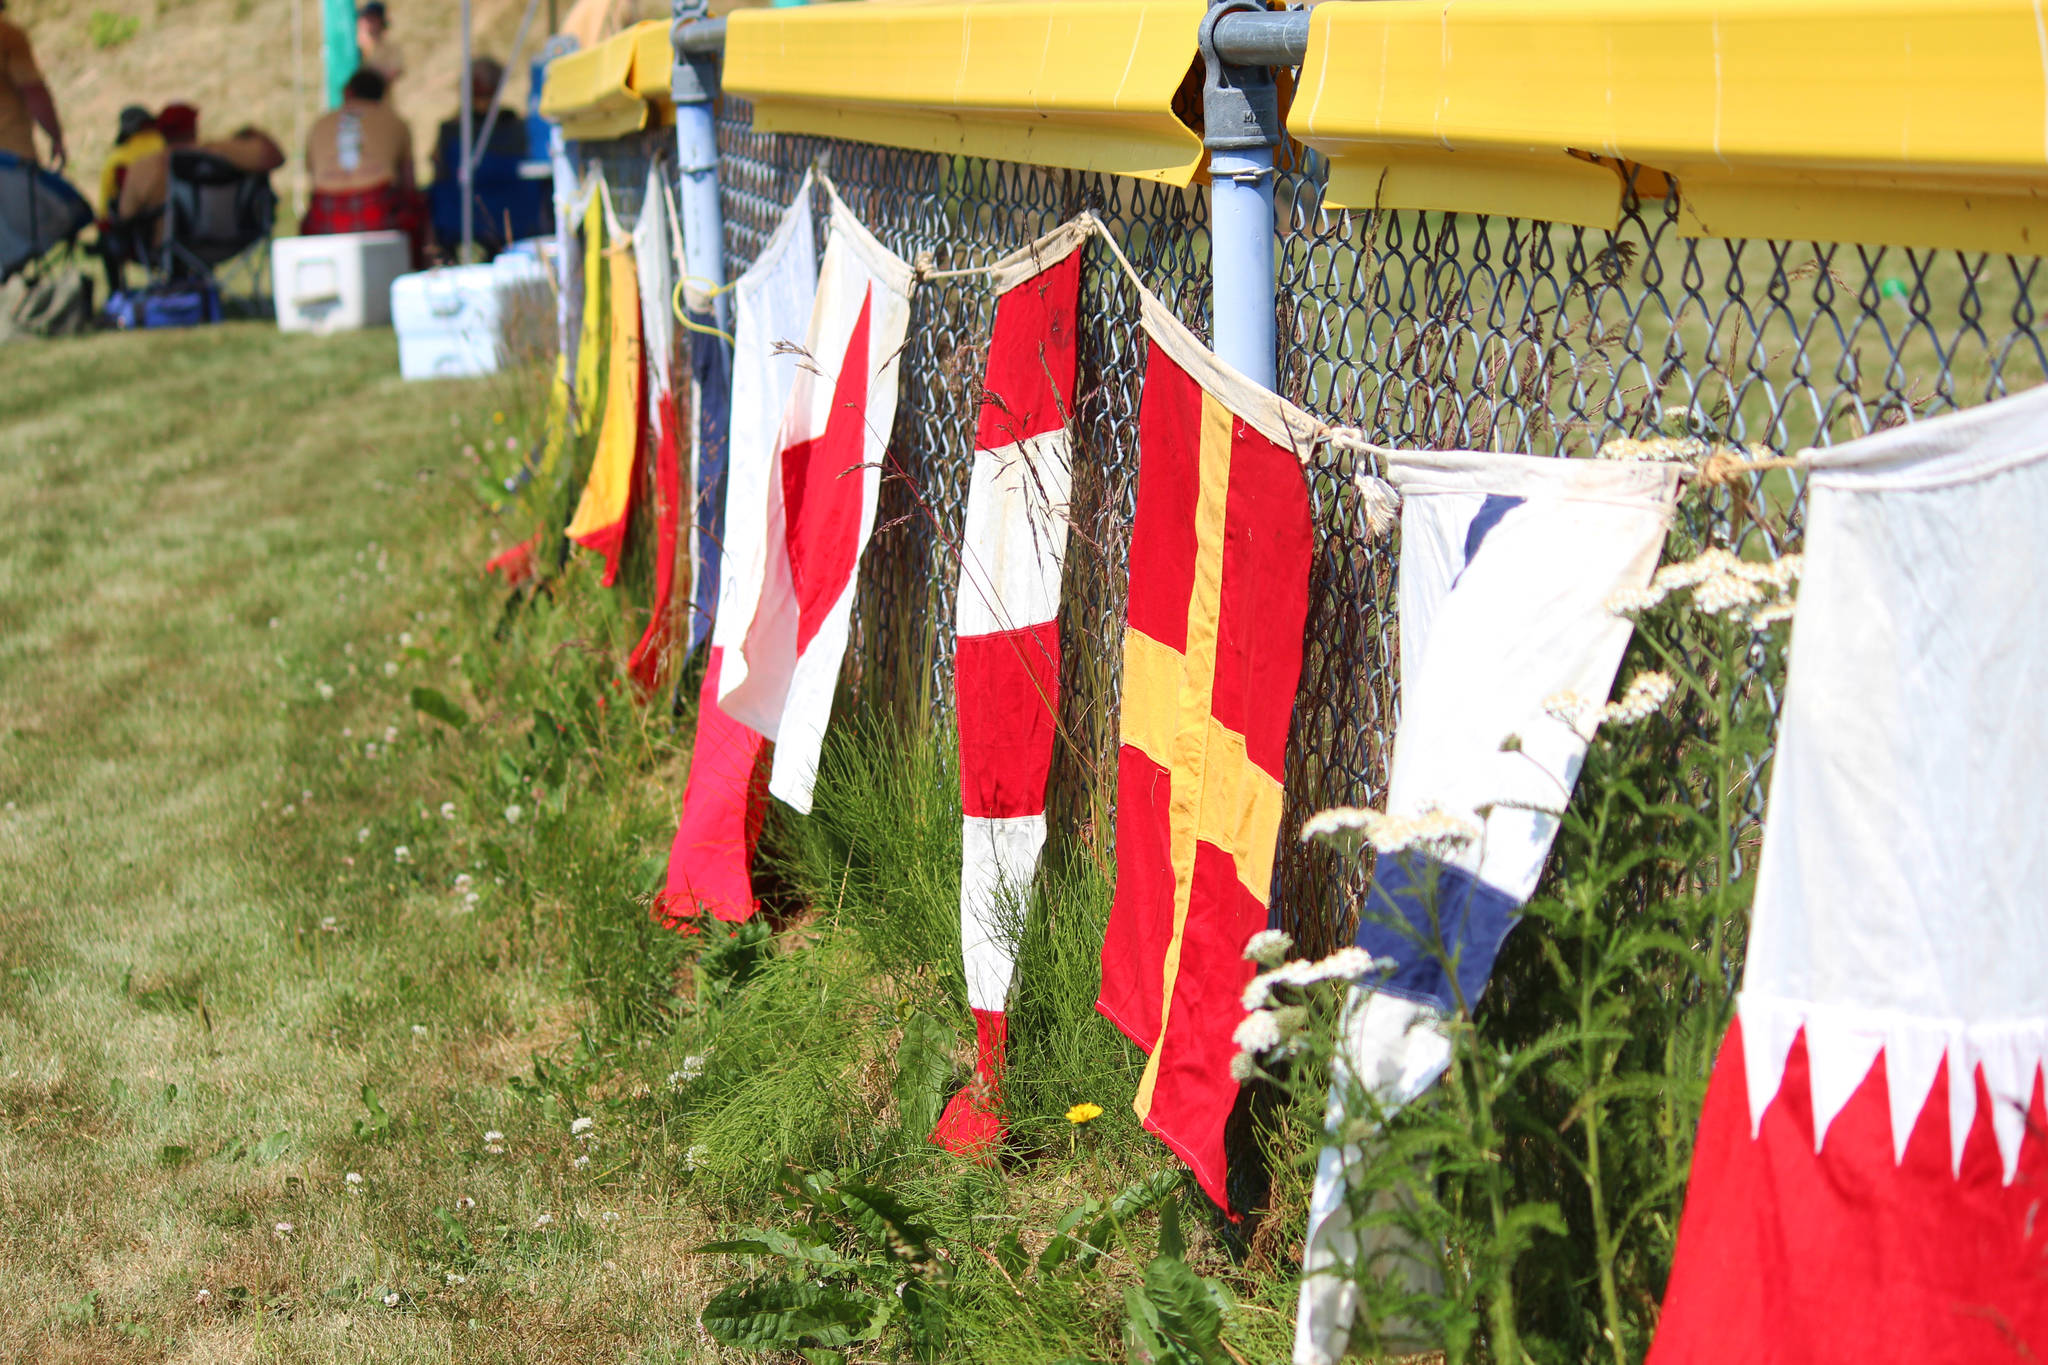 Decorative flags line a fence at the annual Kachemak Bay Highland Games held Saturday, July 6, 2019 at Karen Hornaday Park in Homer, Alaska. (Photo by Megan Pacer/Homer News)